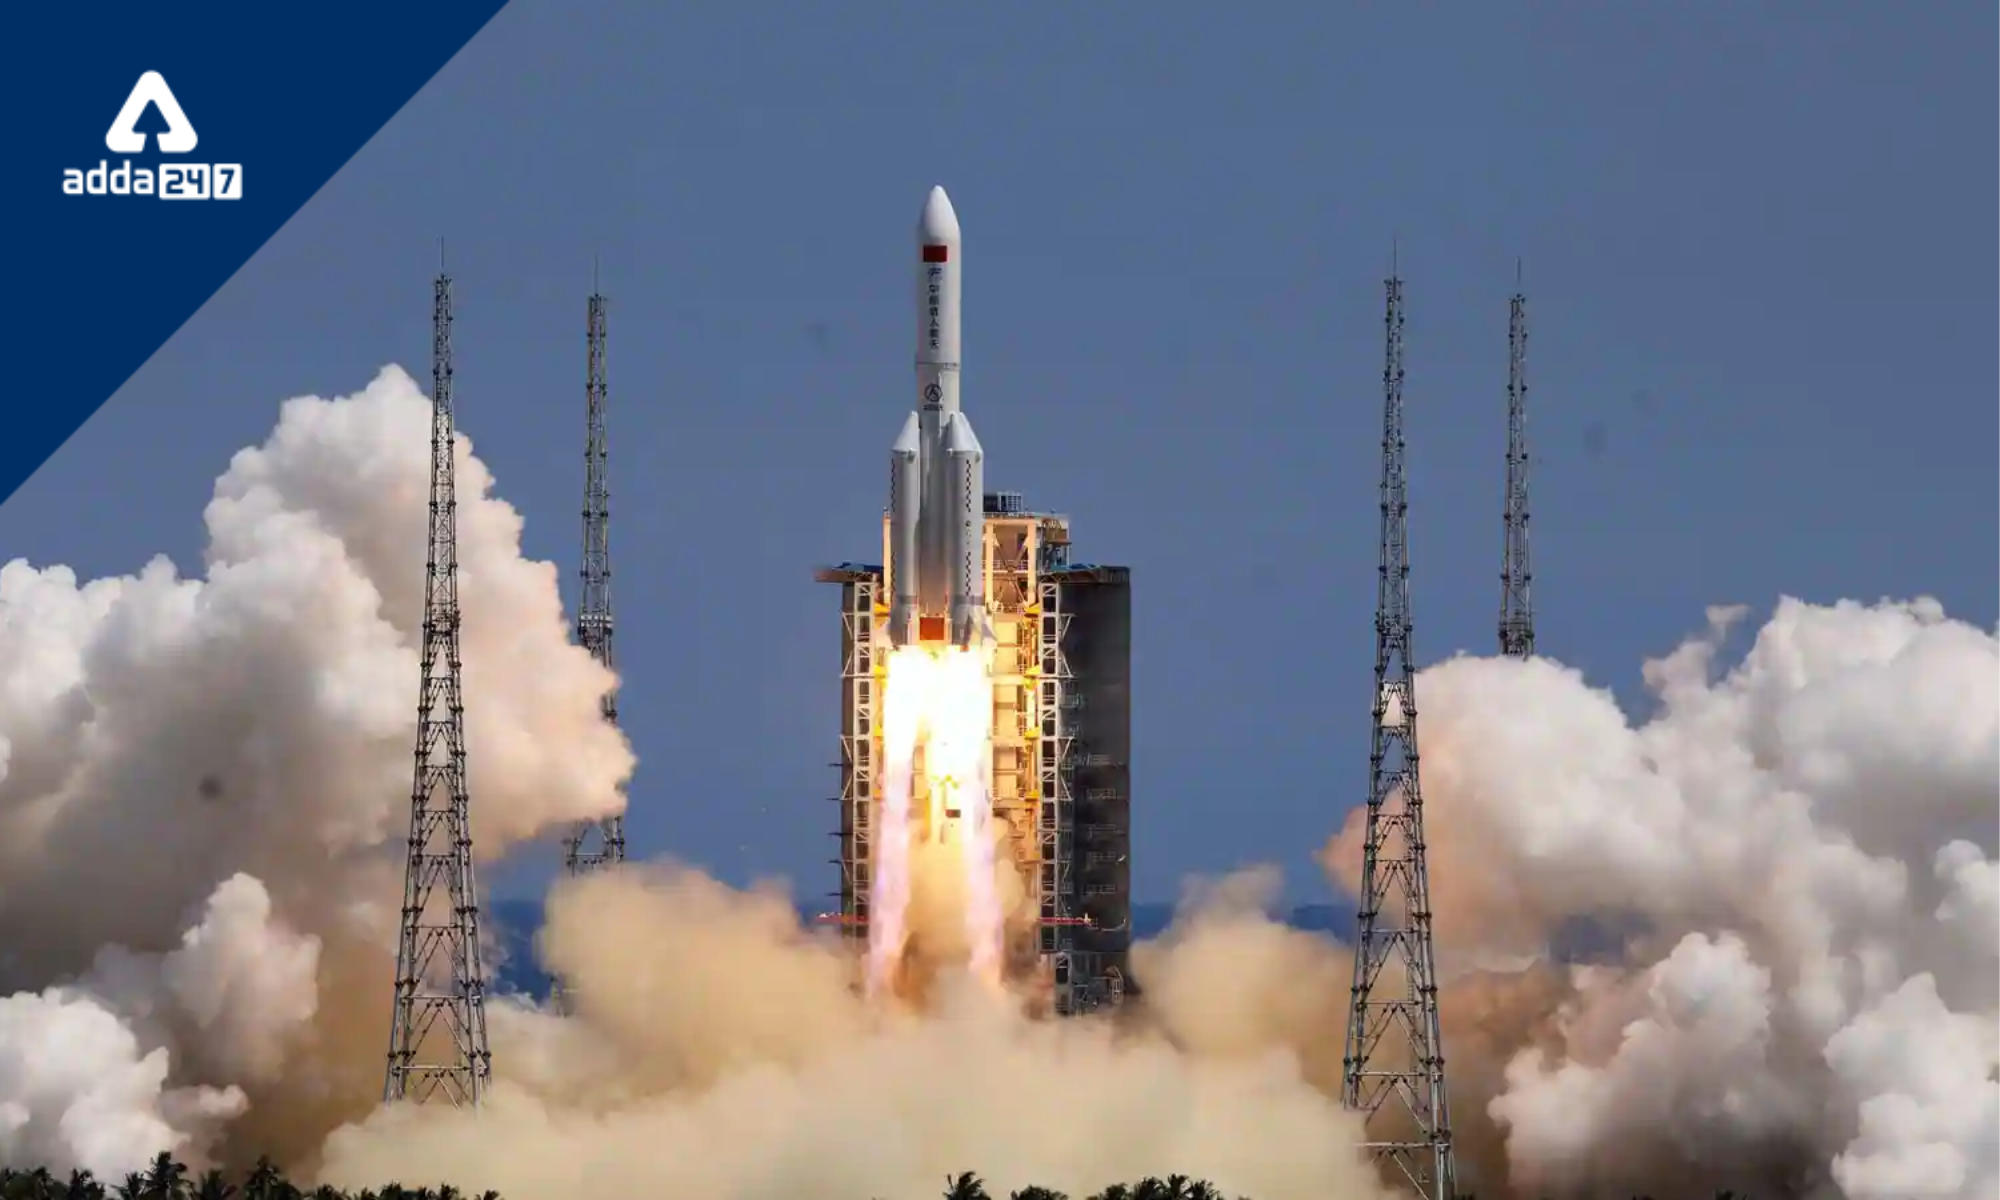 China launches “Wentian,” second of its three space station modules